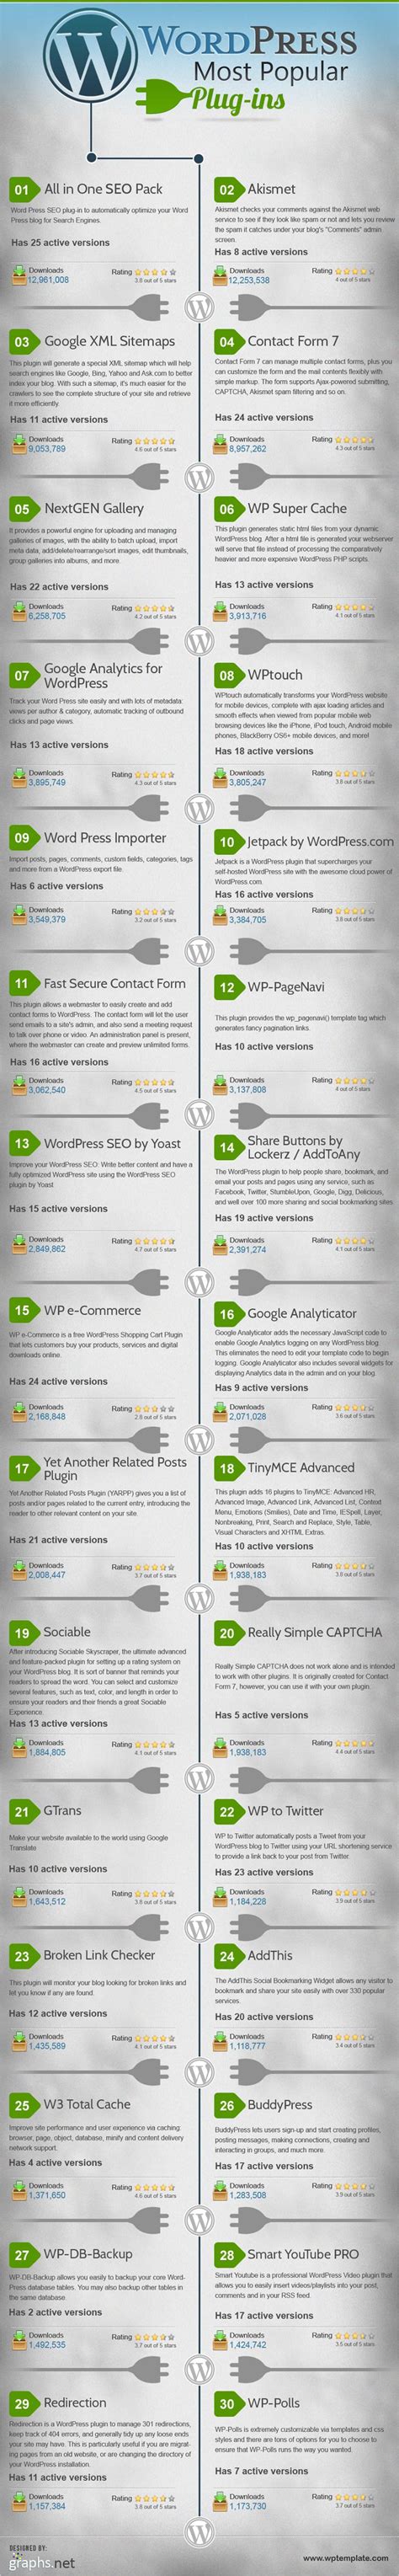 Top 30 Most Popular Wordpress Plugins For Your Blog Infographic